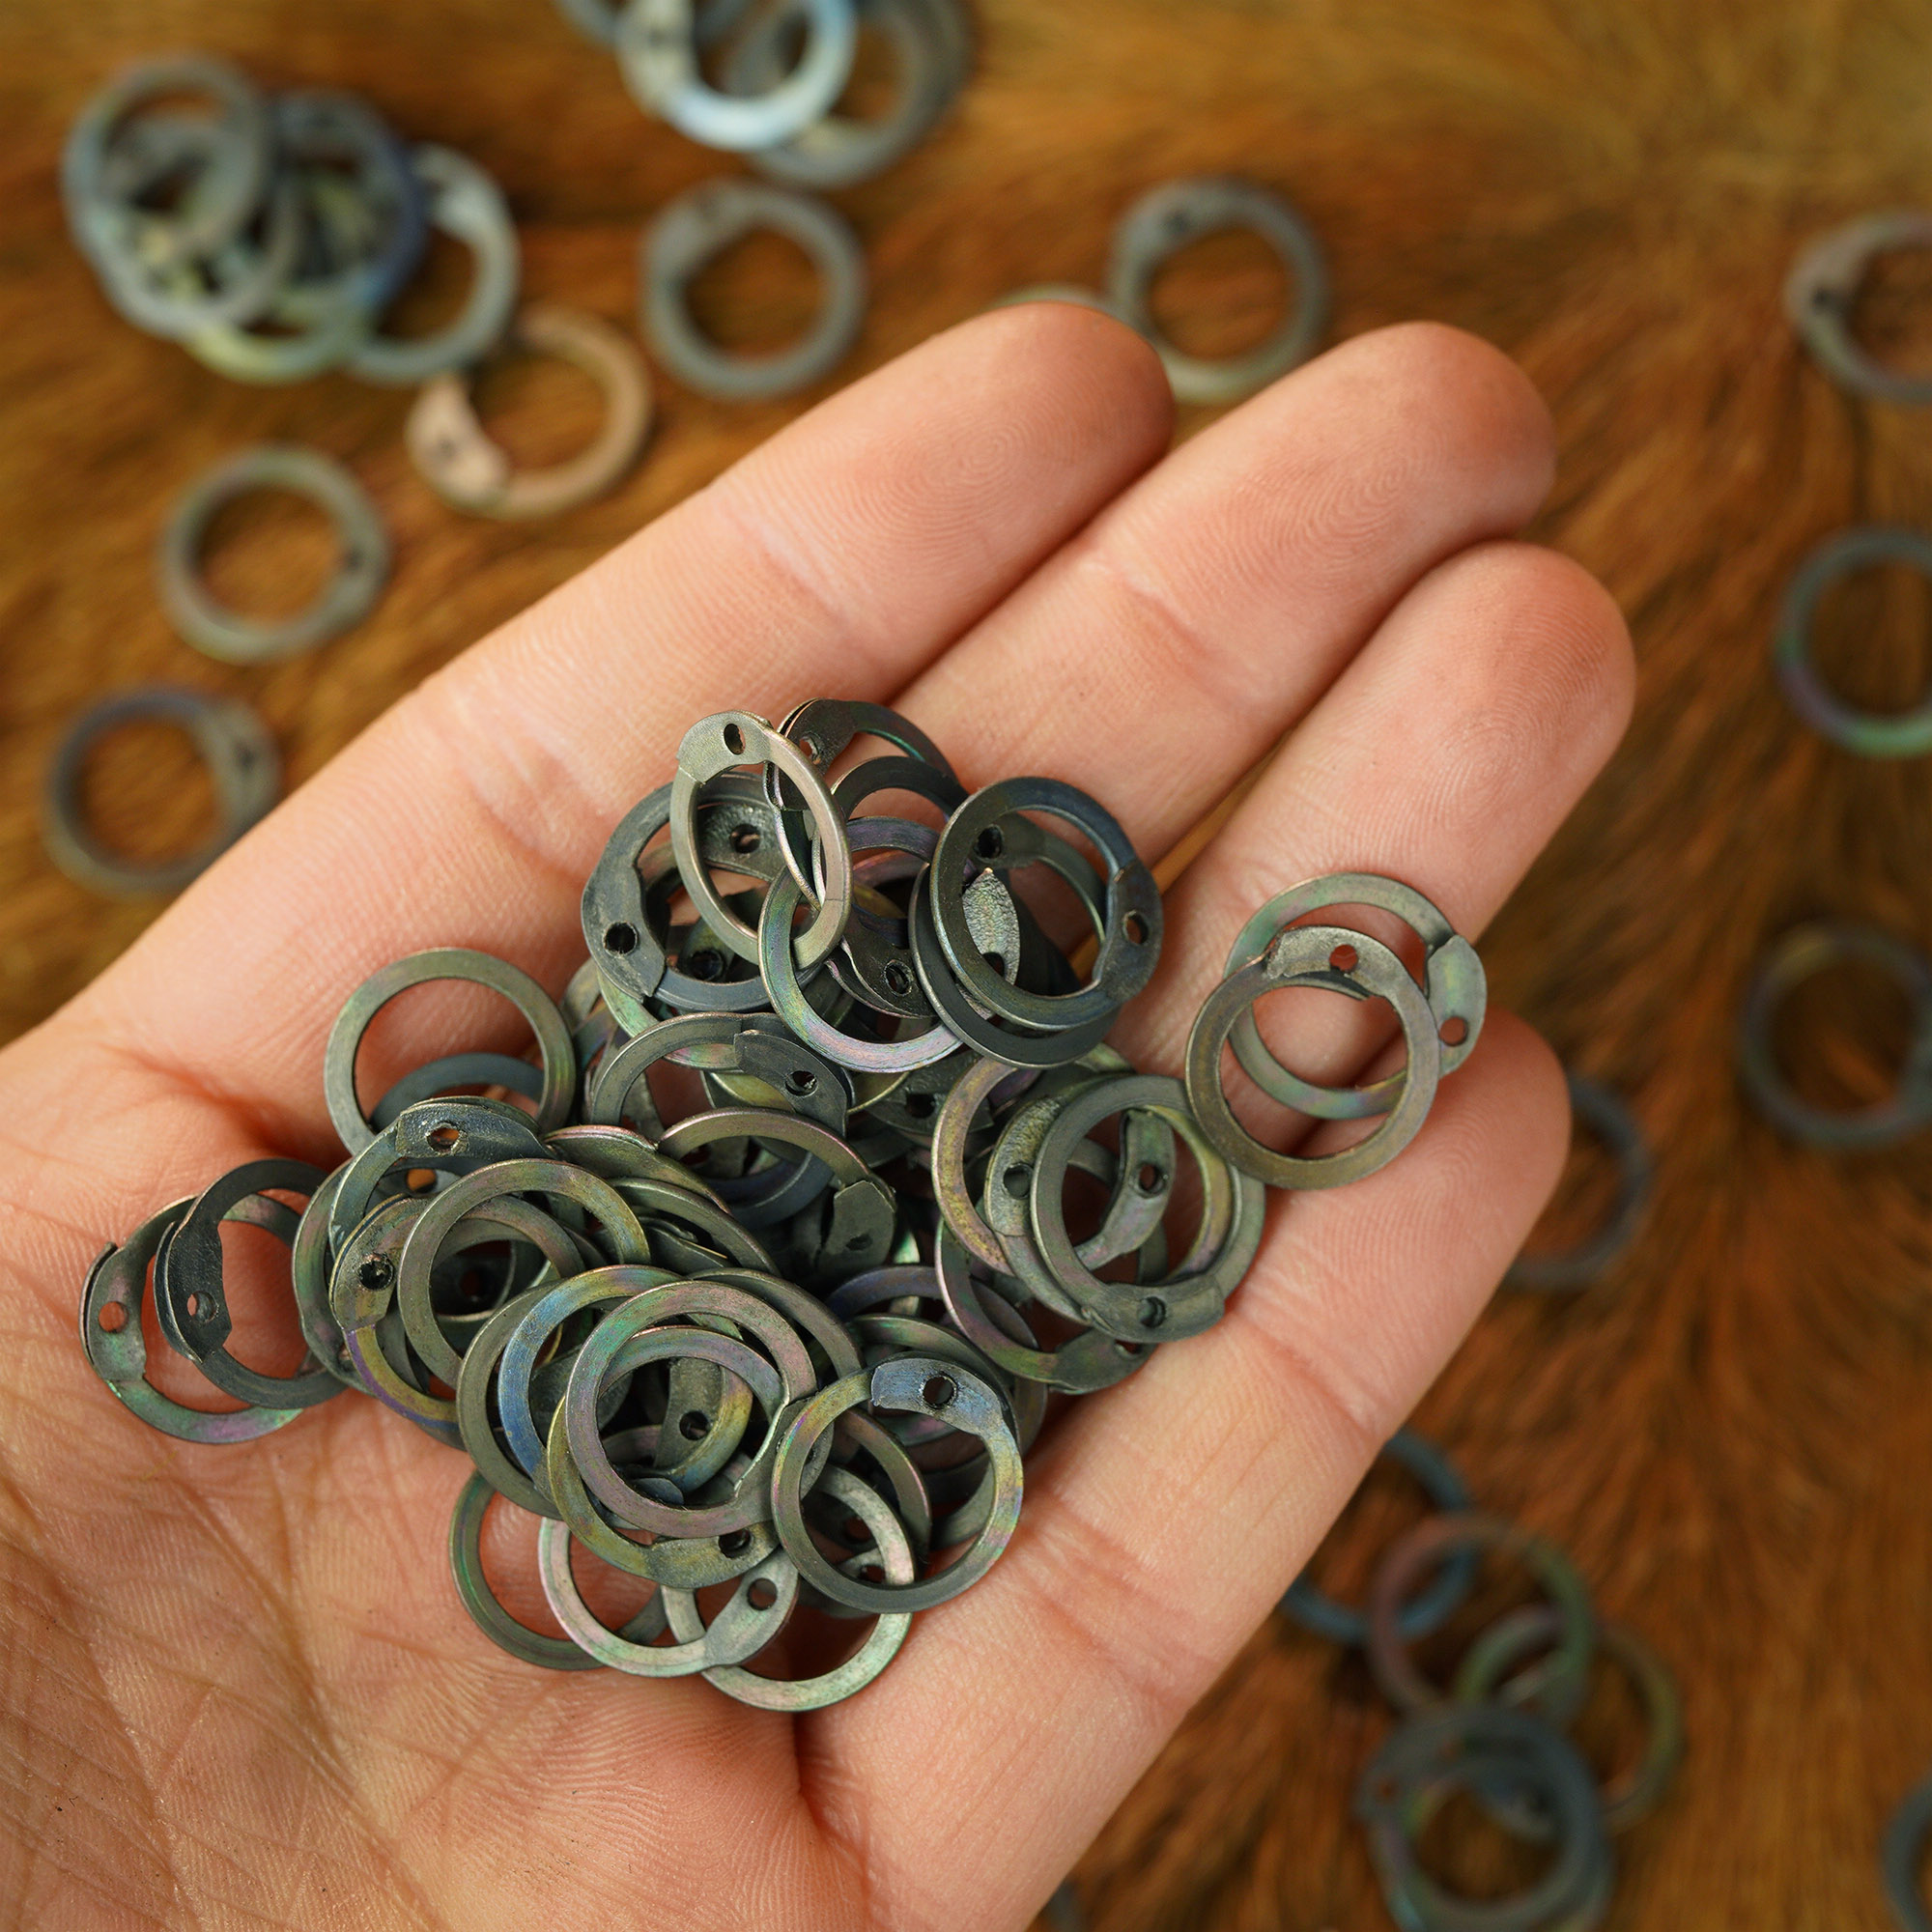 Titanium Flat Rings with Dome Rivets - DIY Chainmail Armor - LORD OF BATTLES